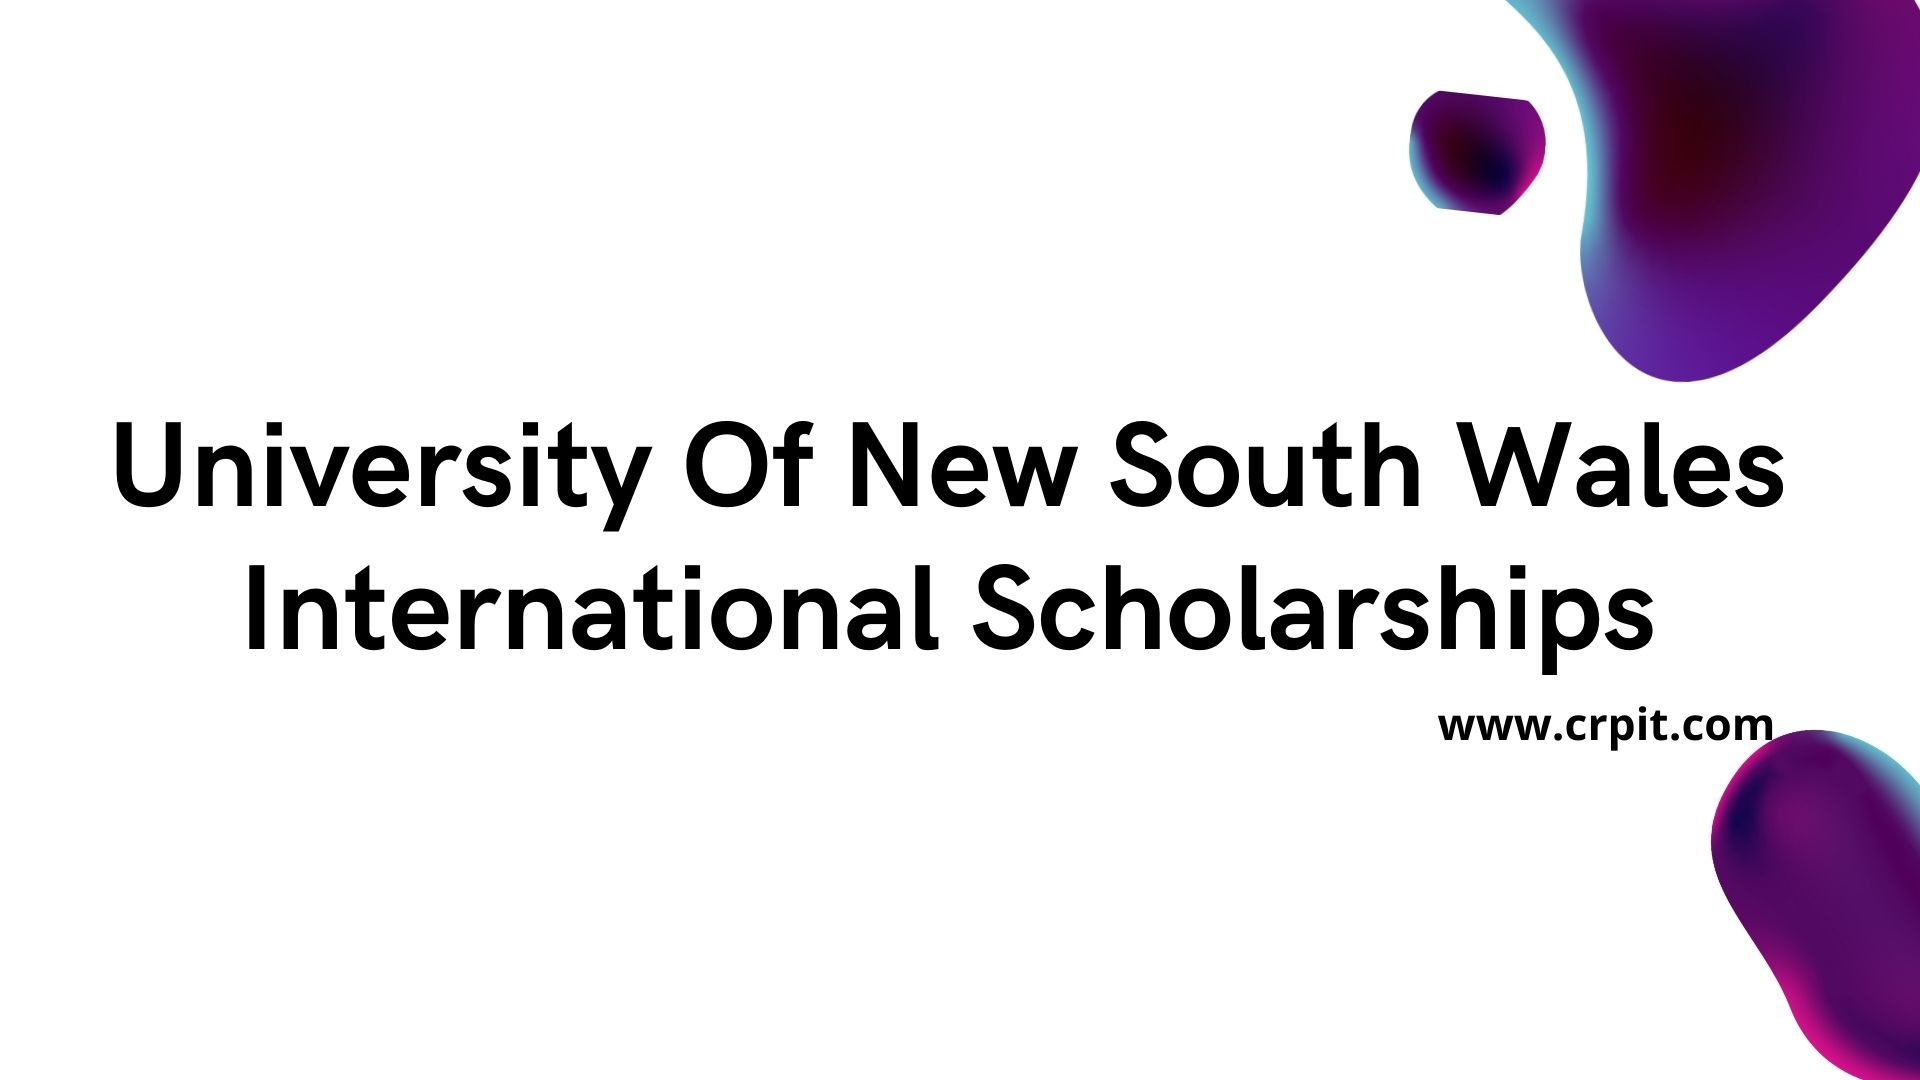 University of New South Wales (UNSW) International Scholarships – Online Application Form, Dates